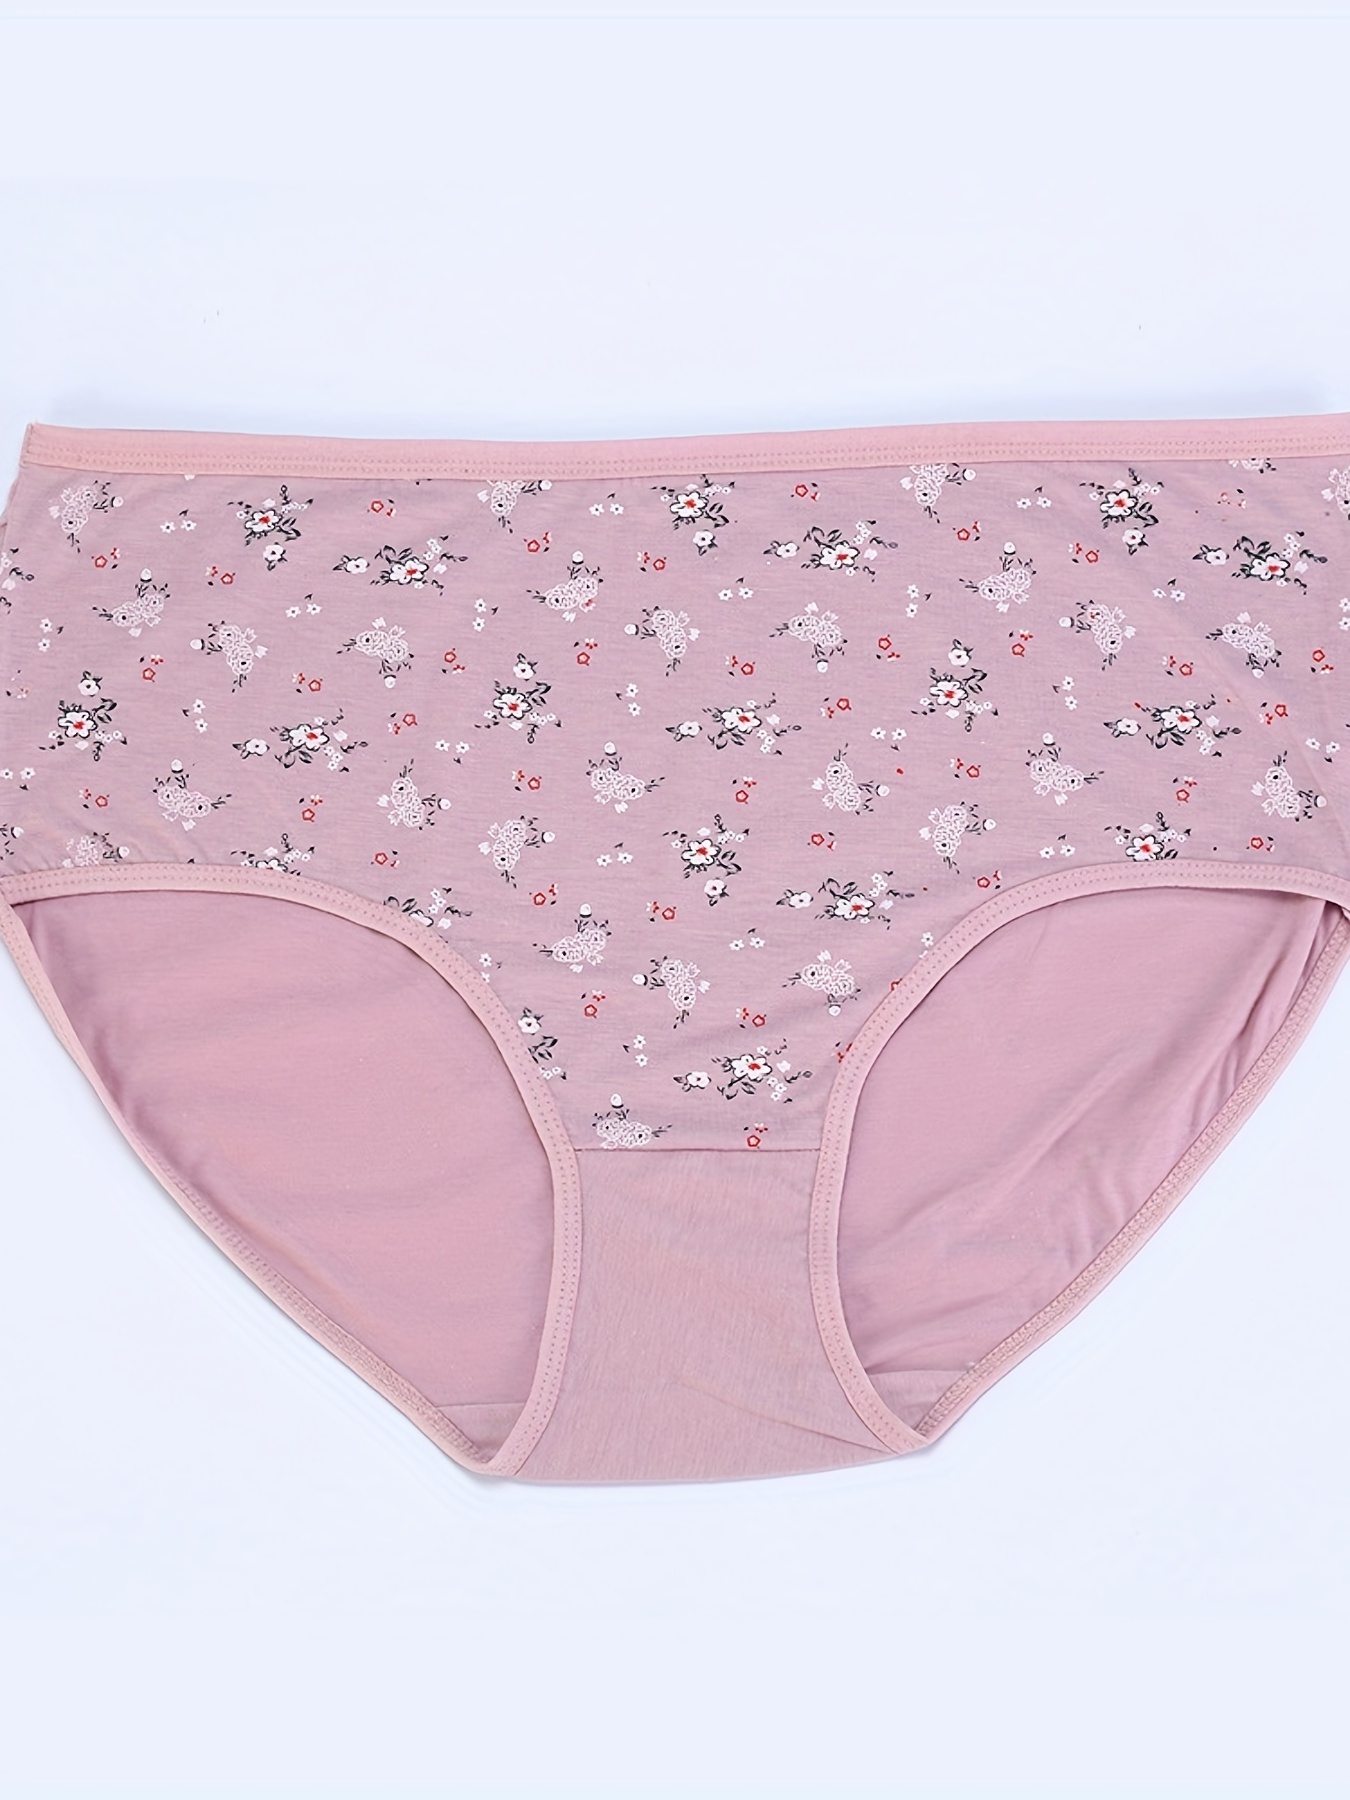 Dropship 4 Pack Plus Size Floral Print Contrast Lace Panties; Women's Plus  High Waist Breathable Elegant Panties 4pcs to Sell Online at a Lower Price